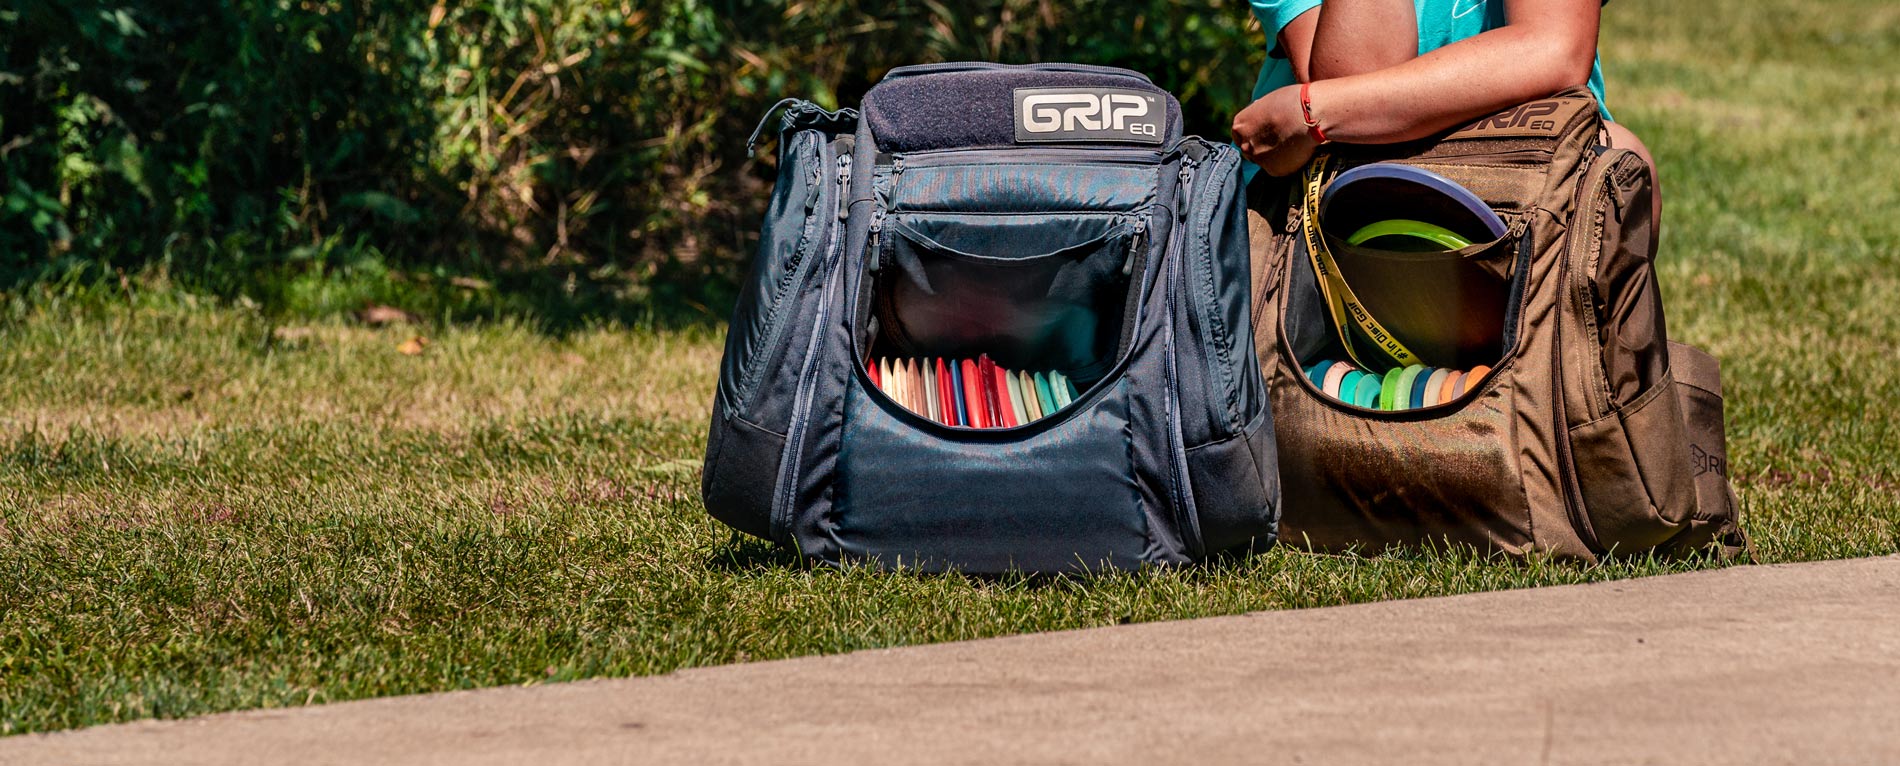 Two GRIPeq disc golf bags sit on the ground.